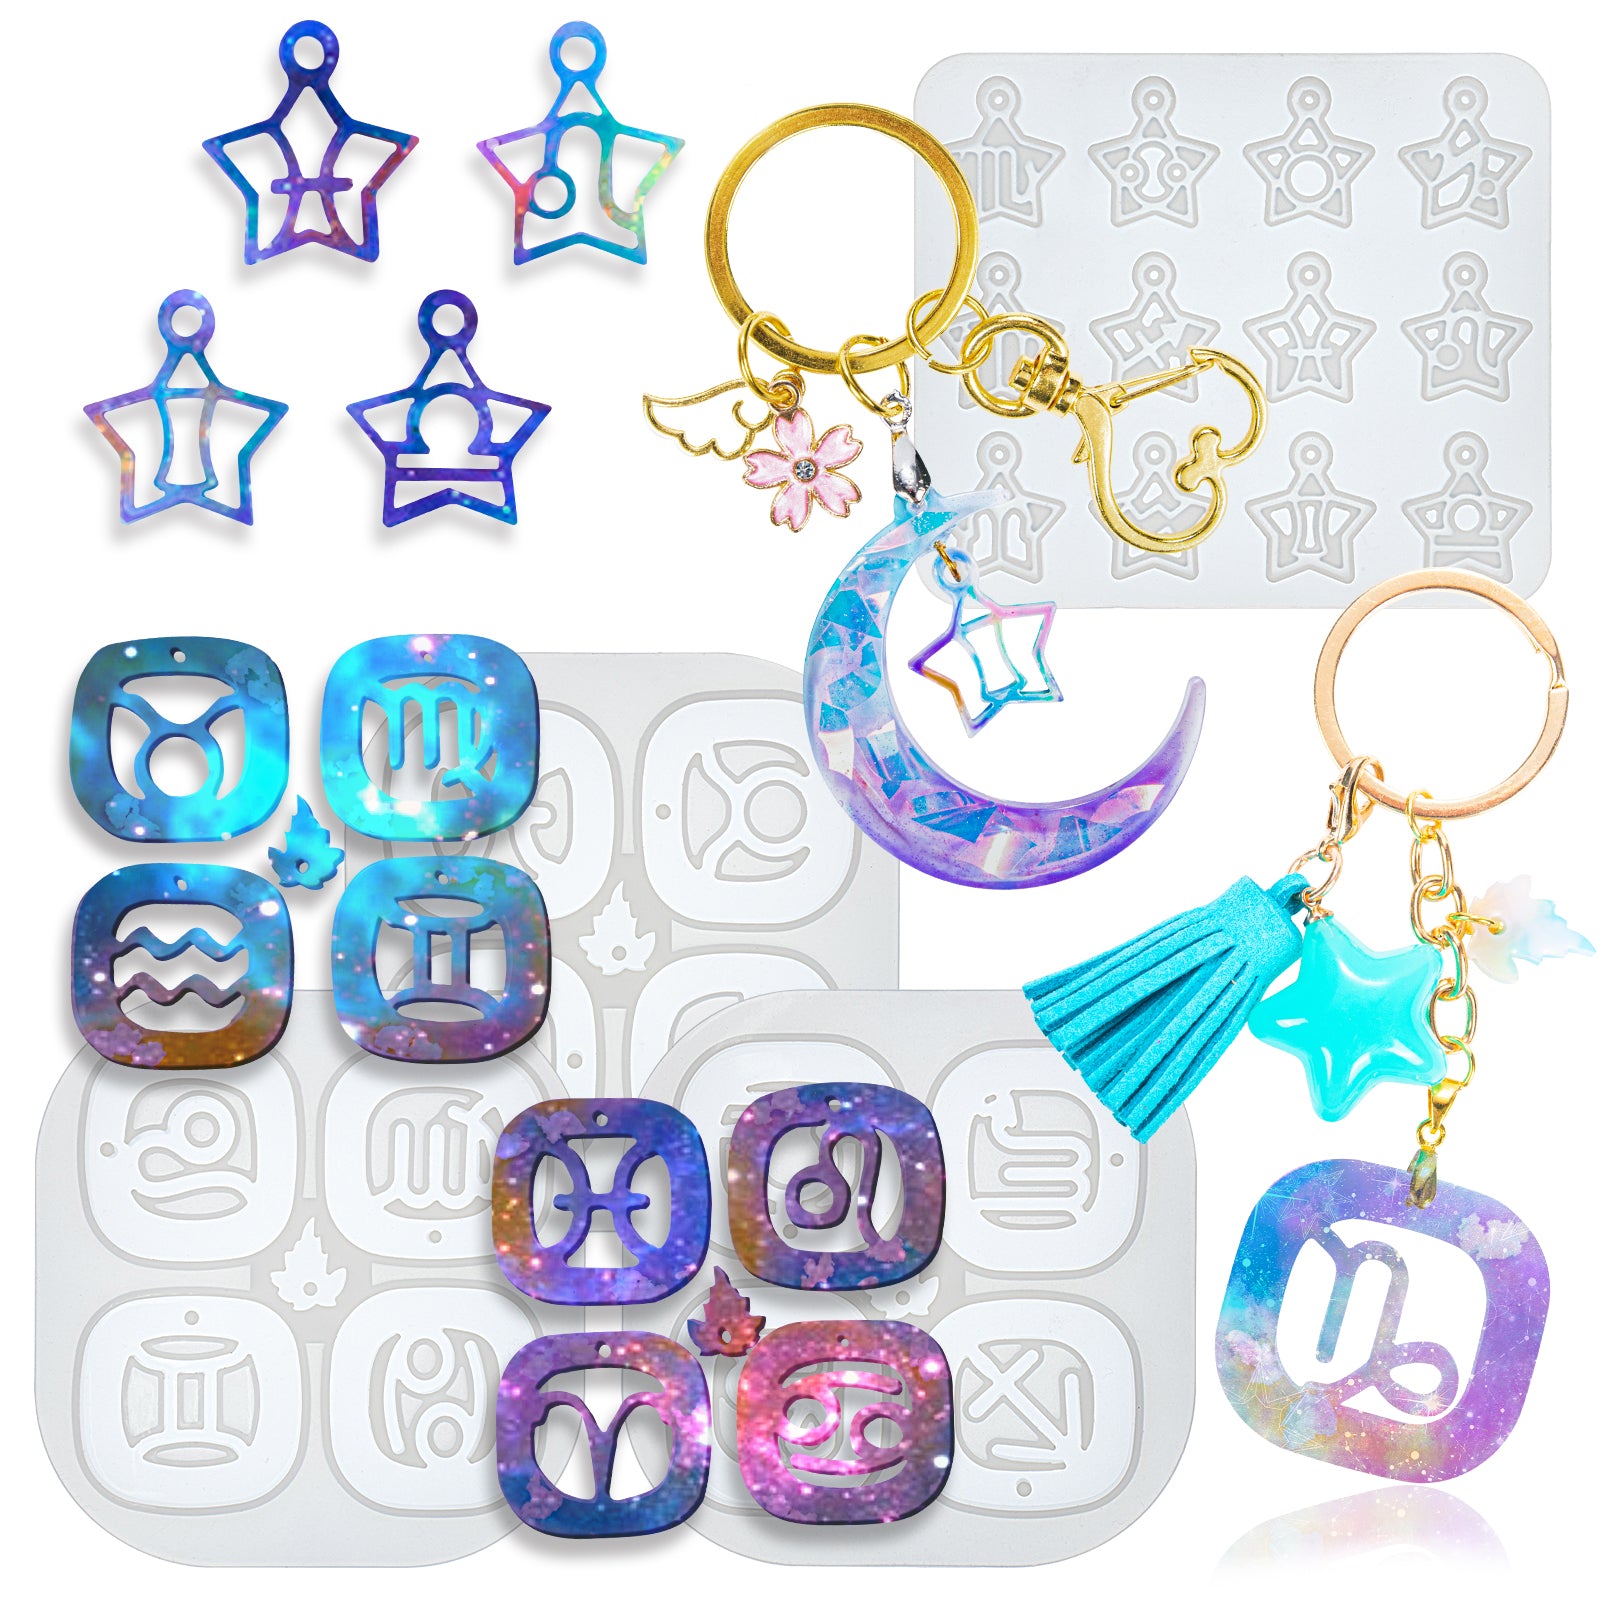 Funshowcase Zodiac Resin Silicone Molds Pack of 9 for Keychain Charms Necklace Pendant Earring Bracelet Jewelry Making, 4073 4435-4437 Pack of 4